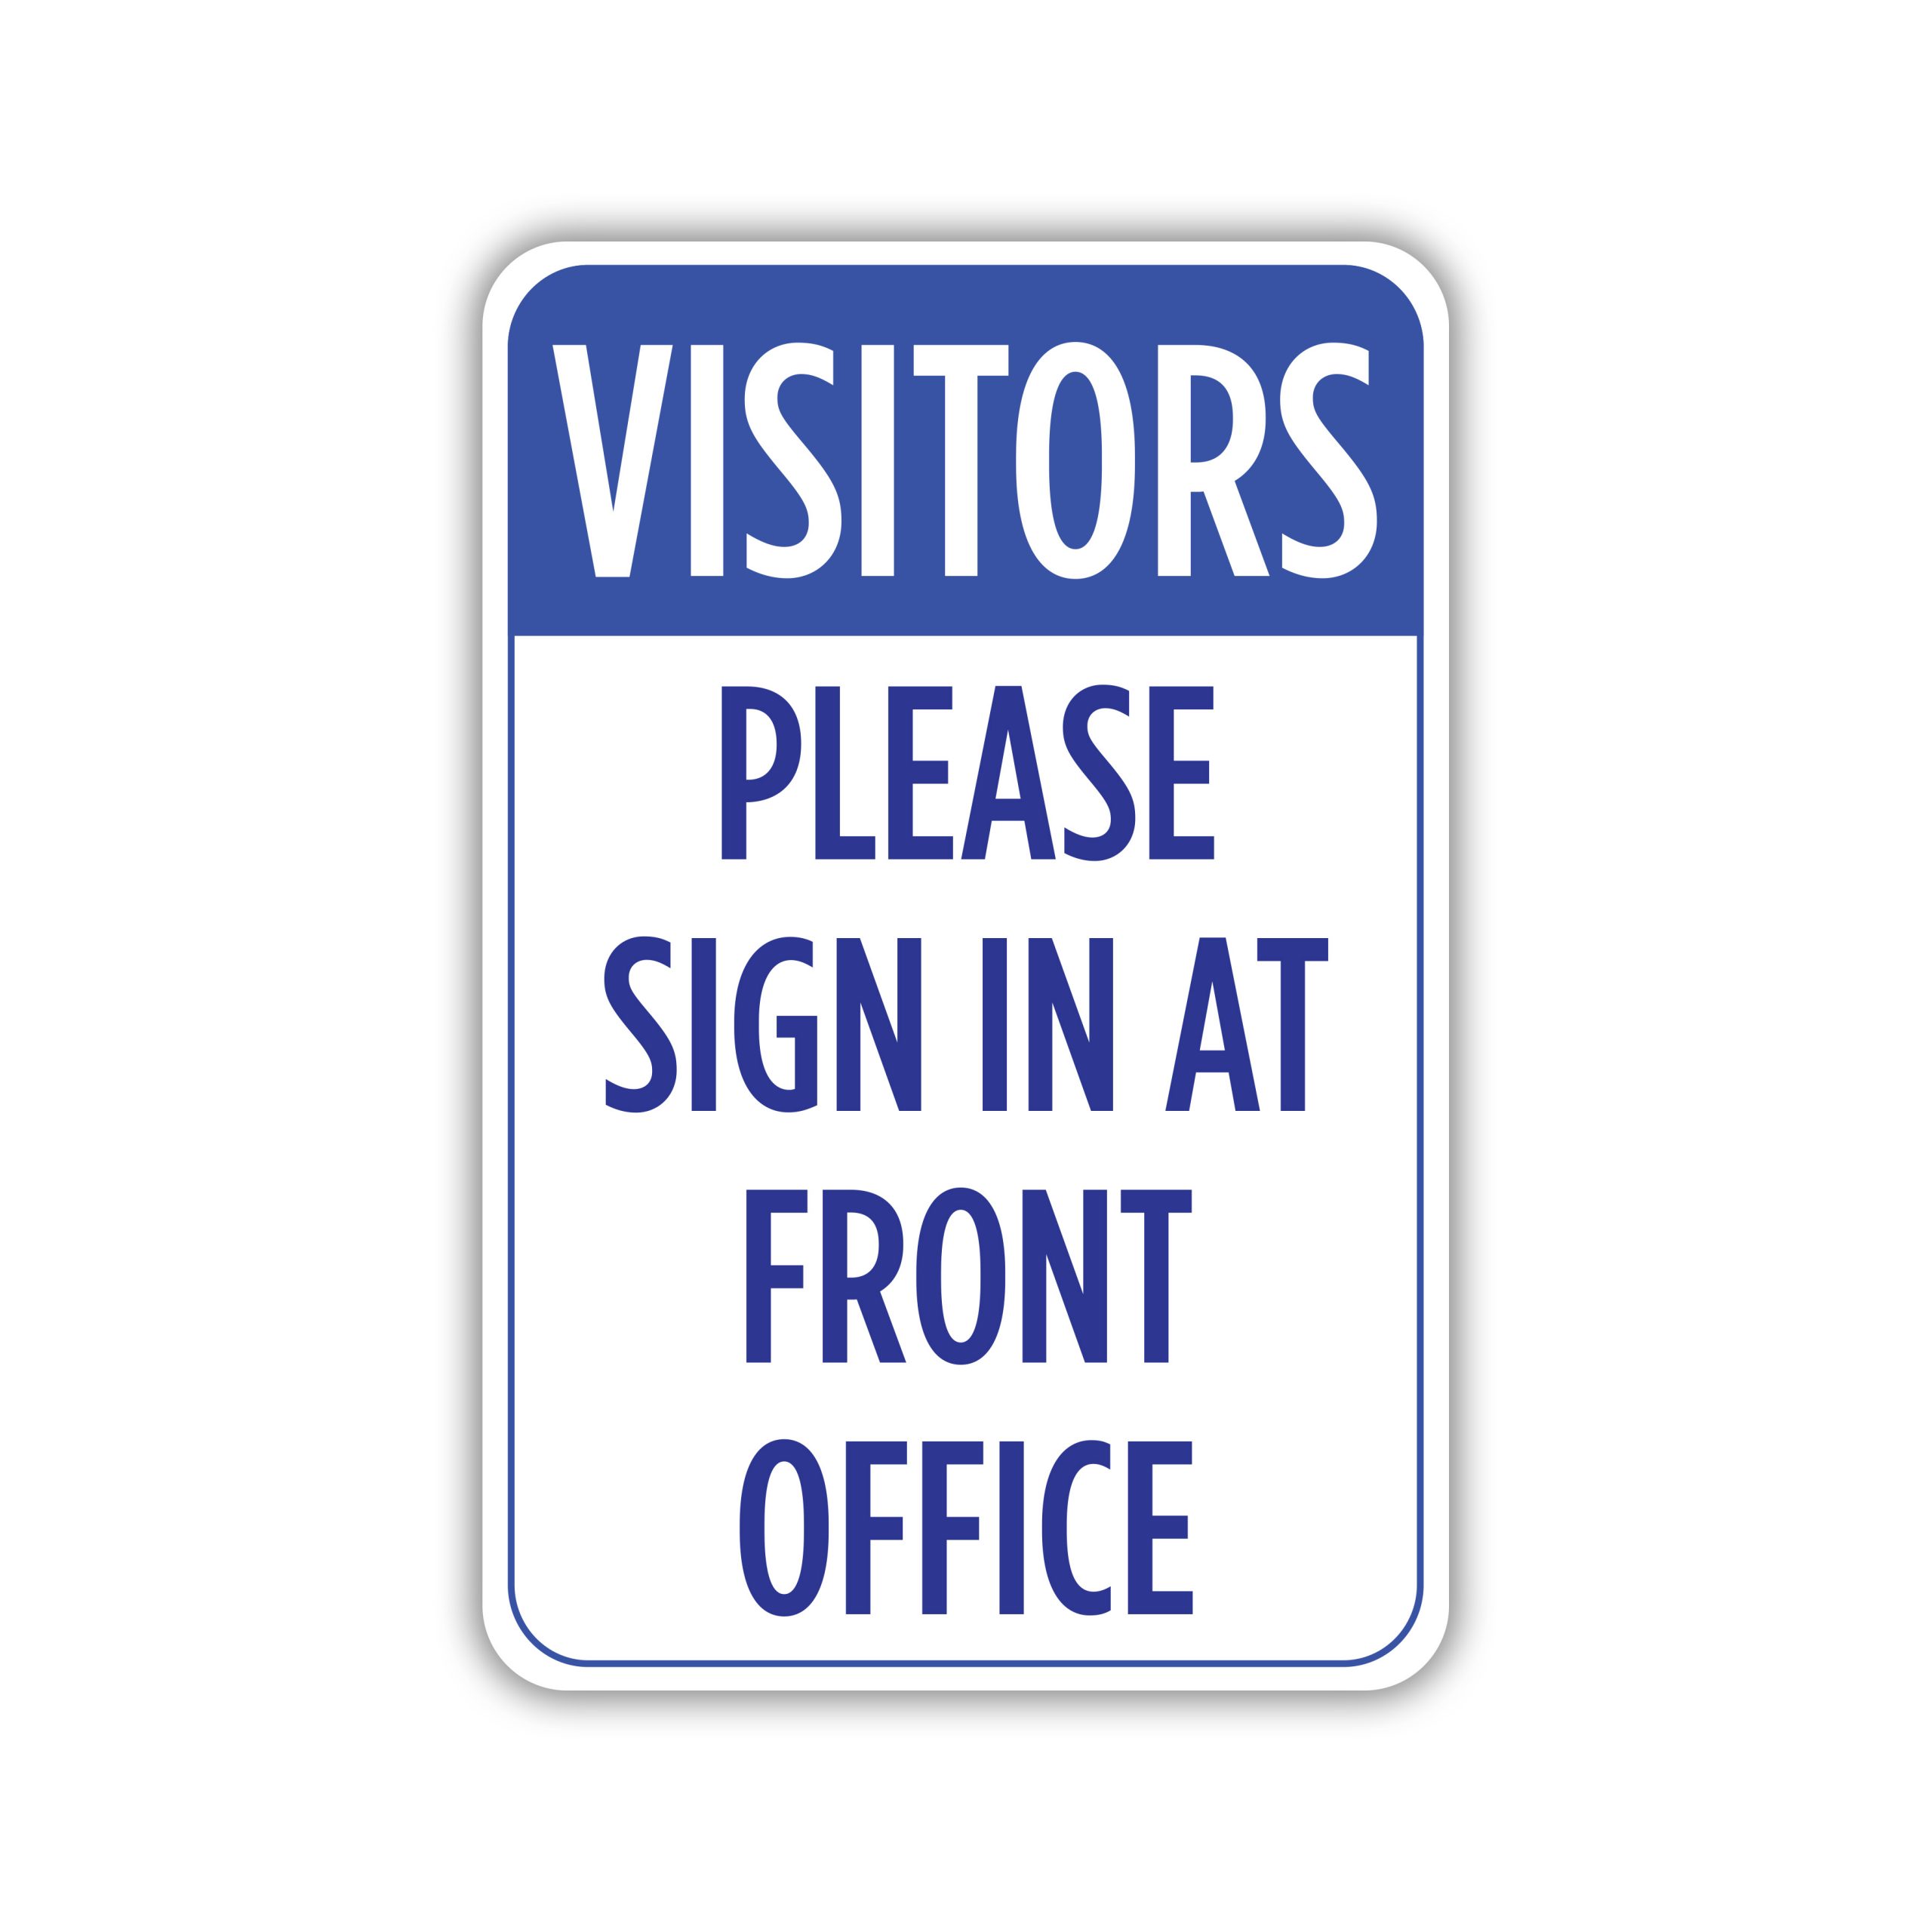 please check in at front desk signs